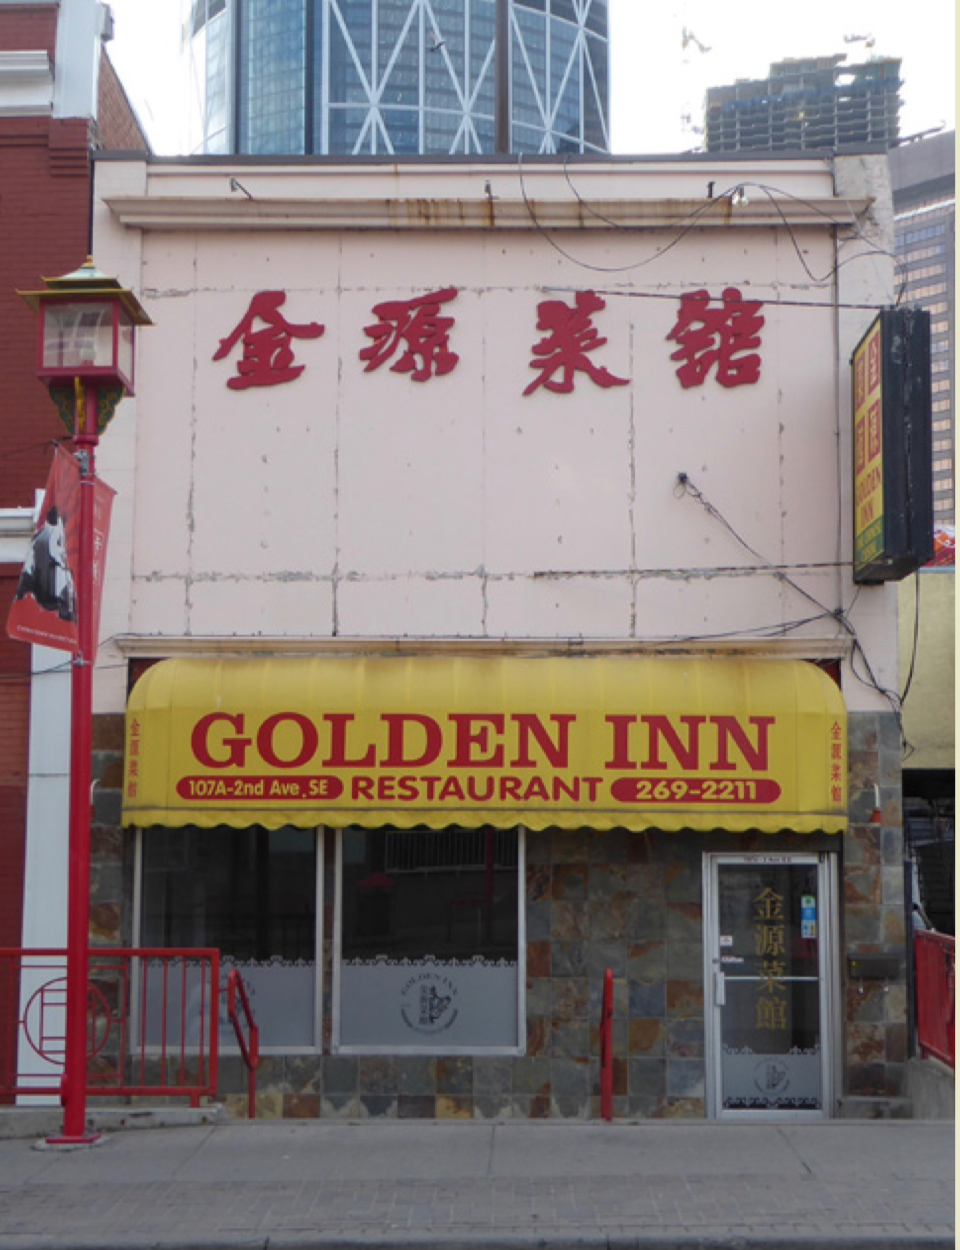 Building front. First floor is a Chinese restaurant with a yellow awning that says "Golden Inn Restaurant". Front façade of top half of building has four red Chinese characters.